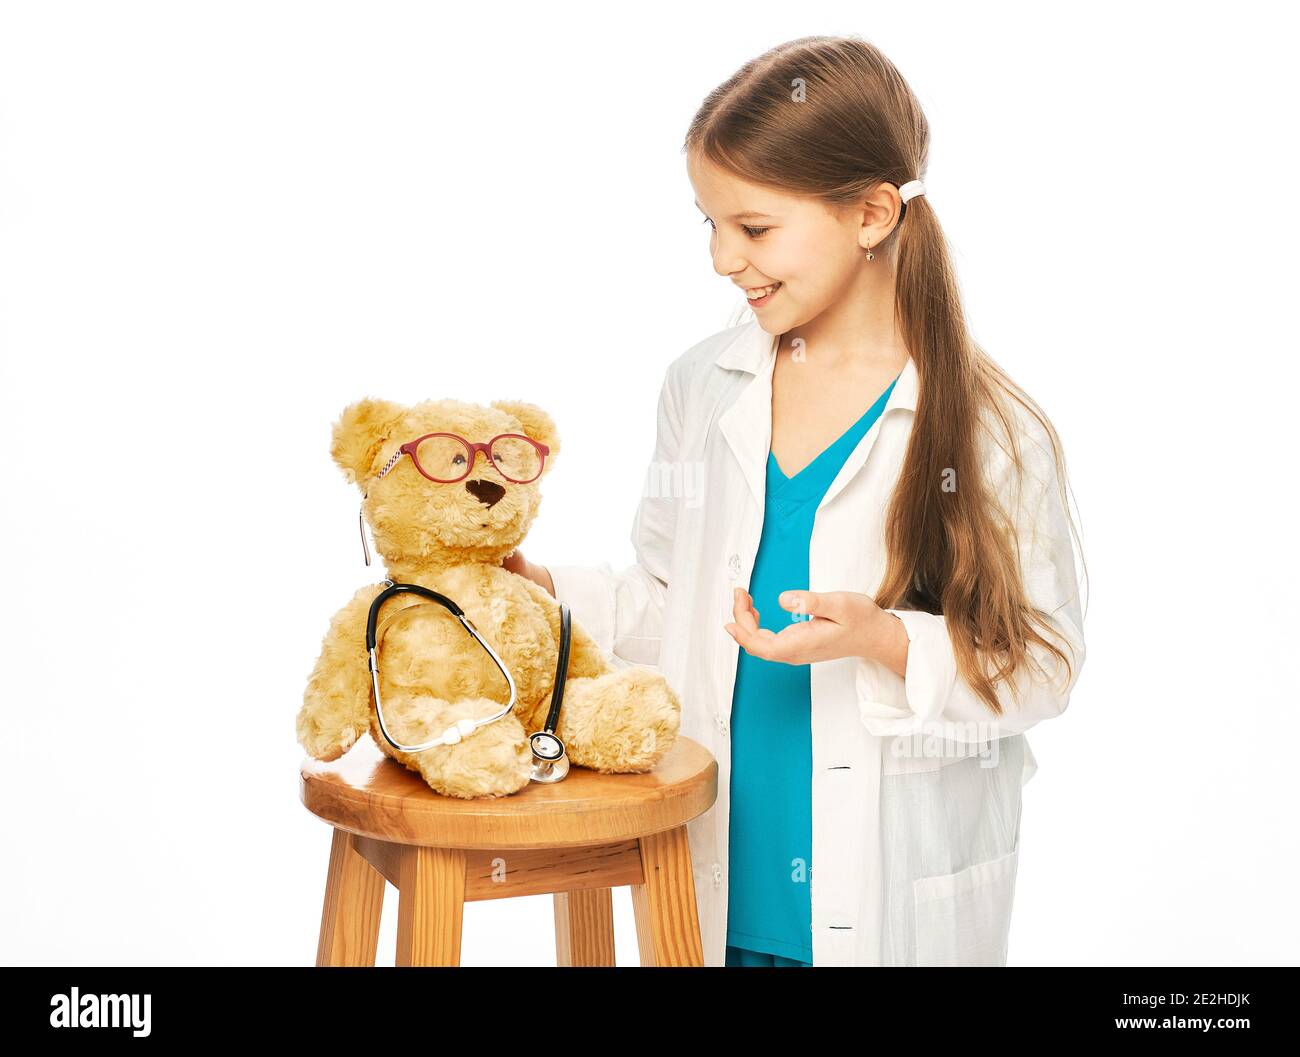 Cute girl playing in doctor profession with a bear toy. Child's hobby and future medical occupation Stock Photo